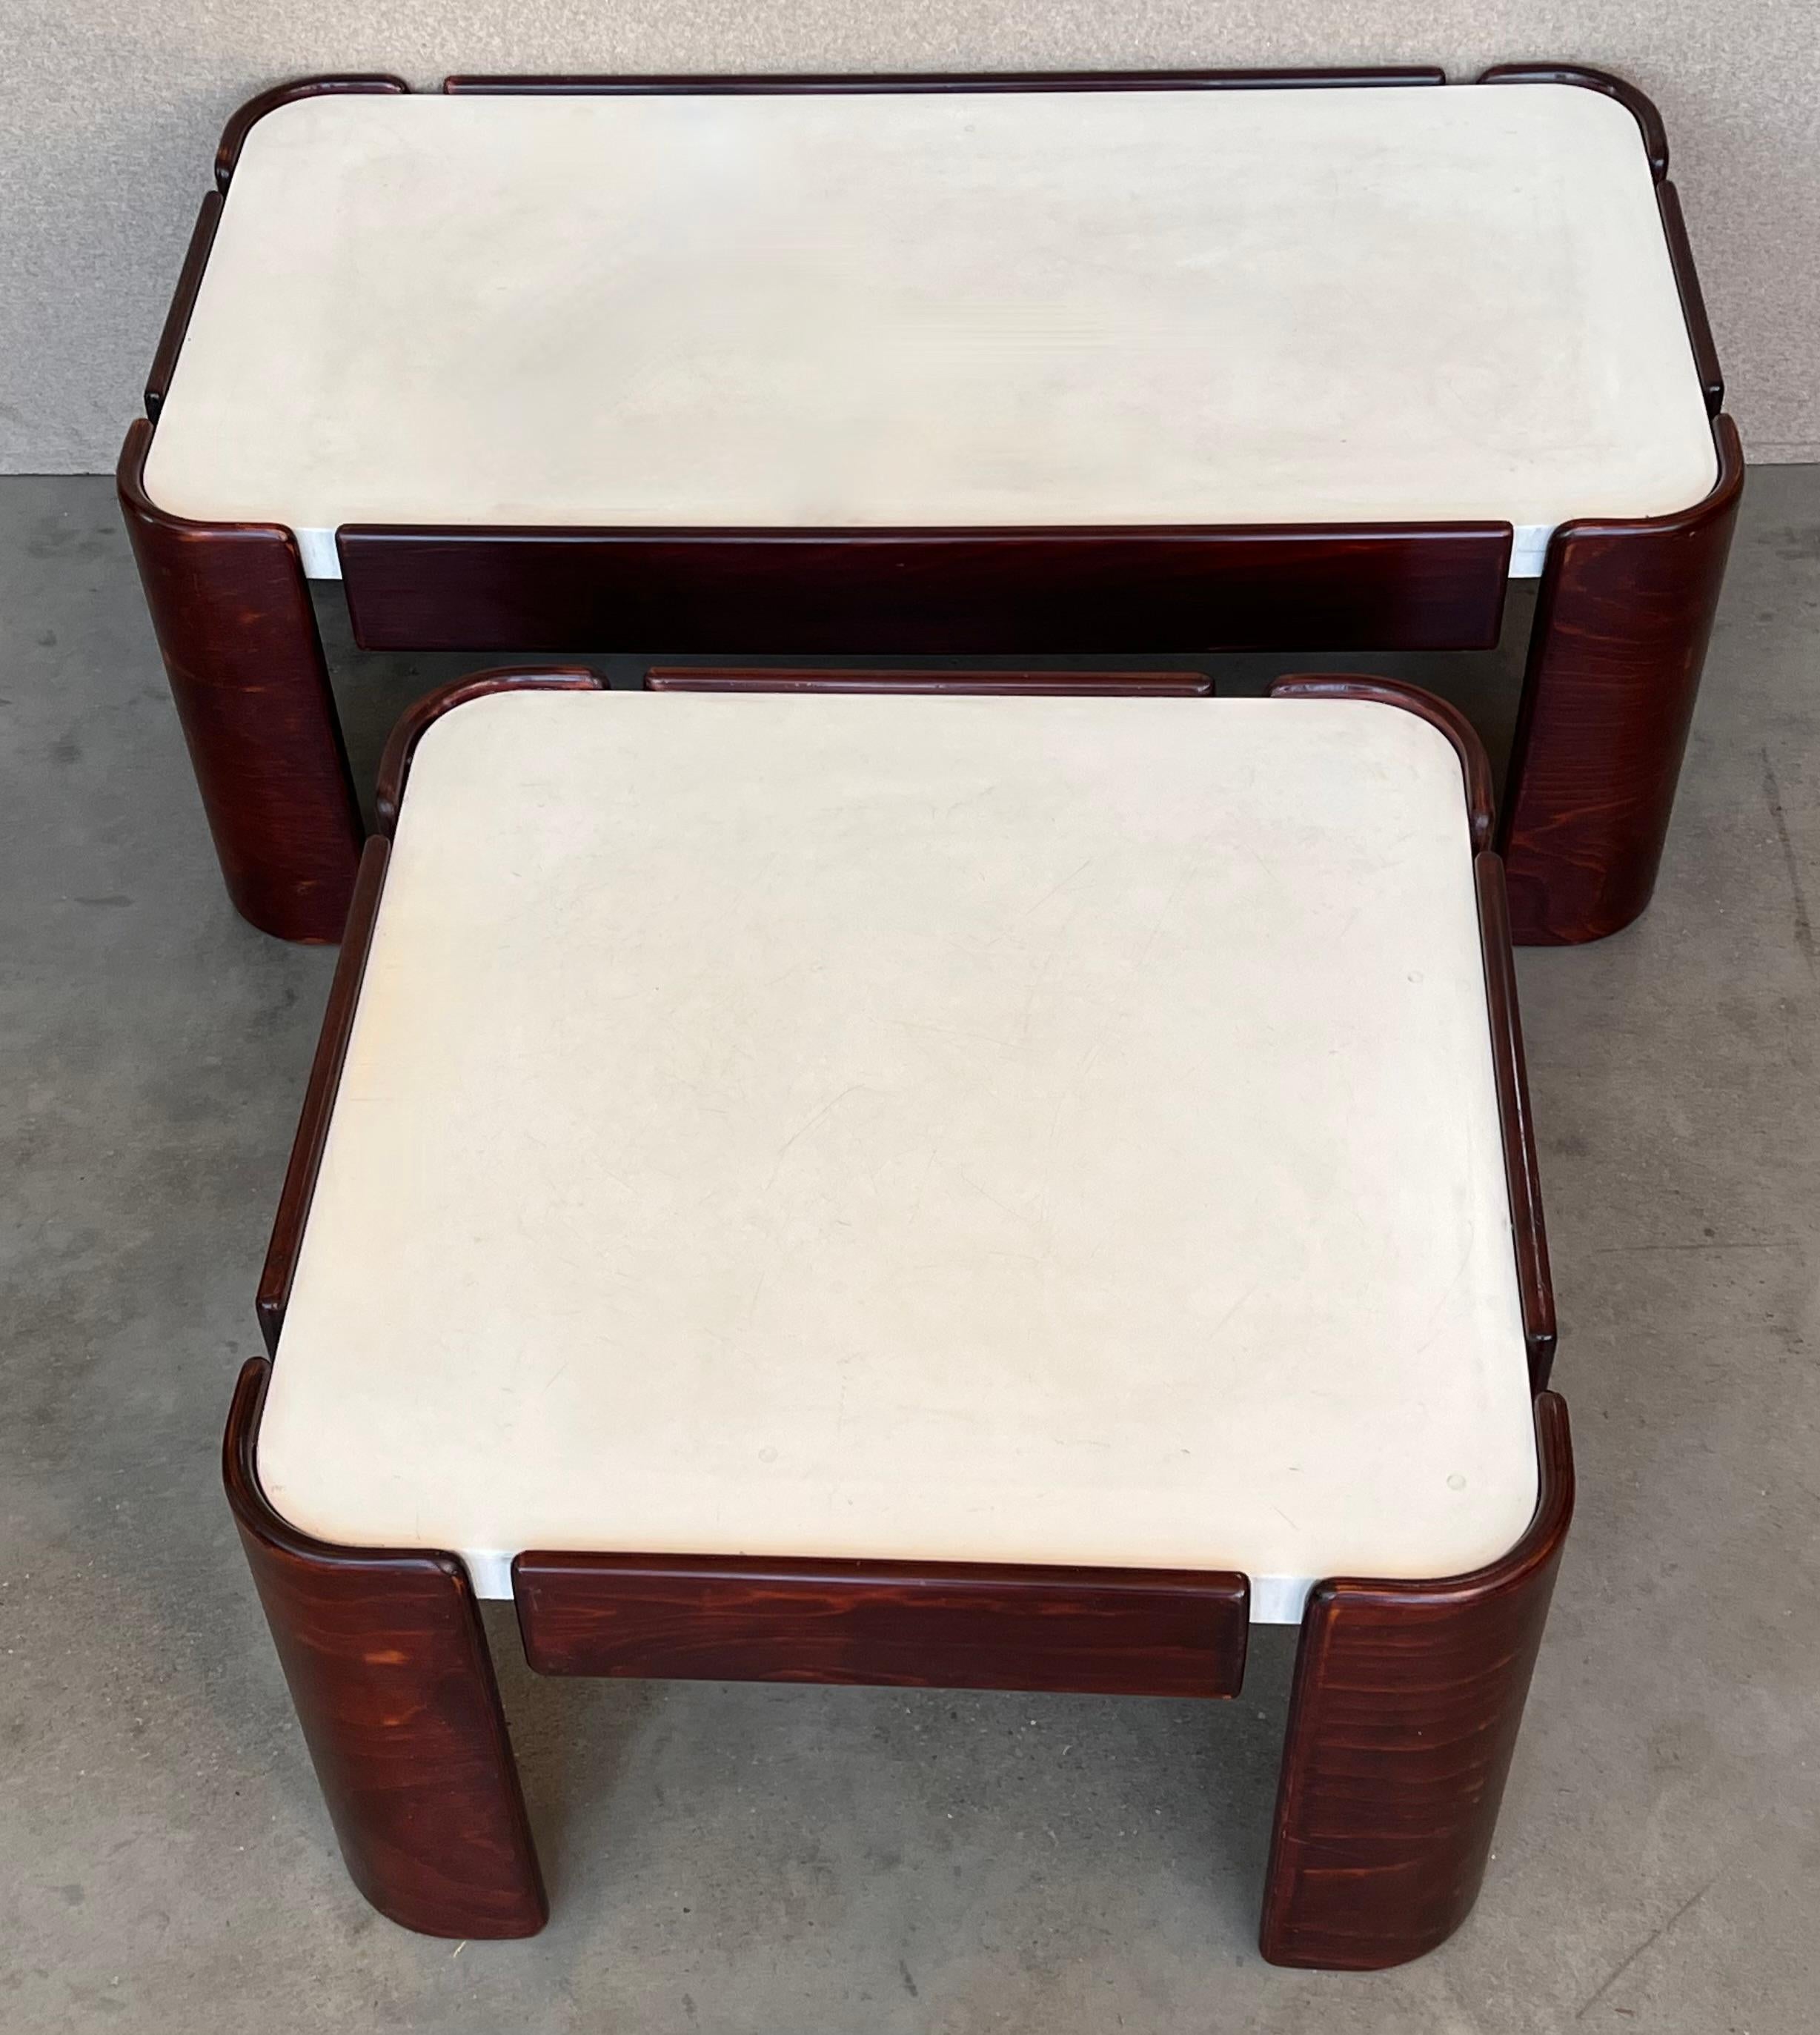 20th Century Set of Mid-Century Modern Coffee Tables with Curved Legs and White Top For Sale